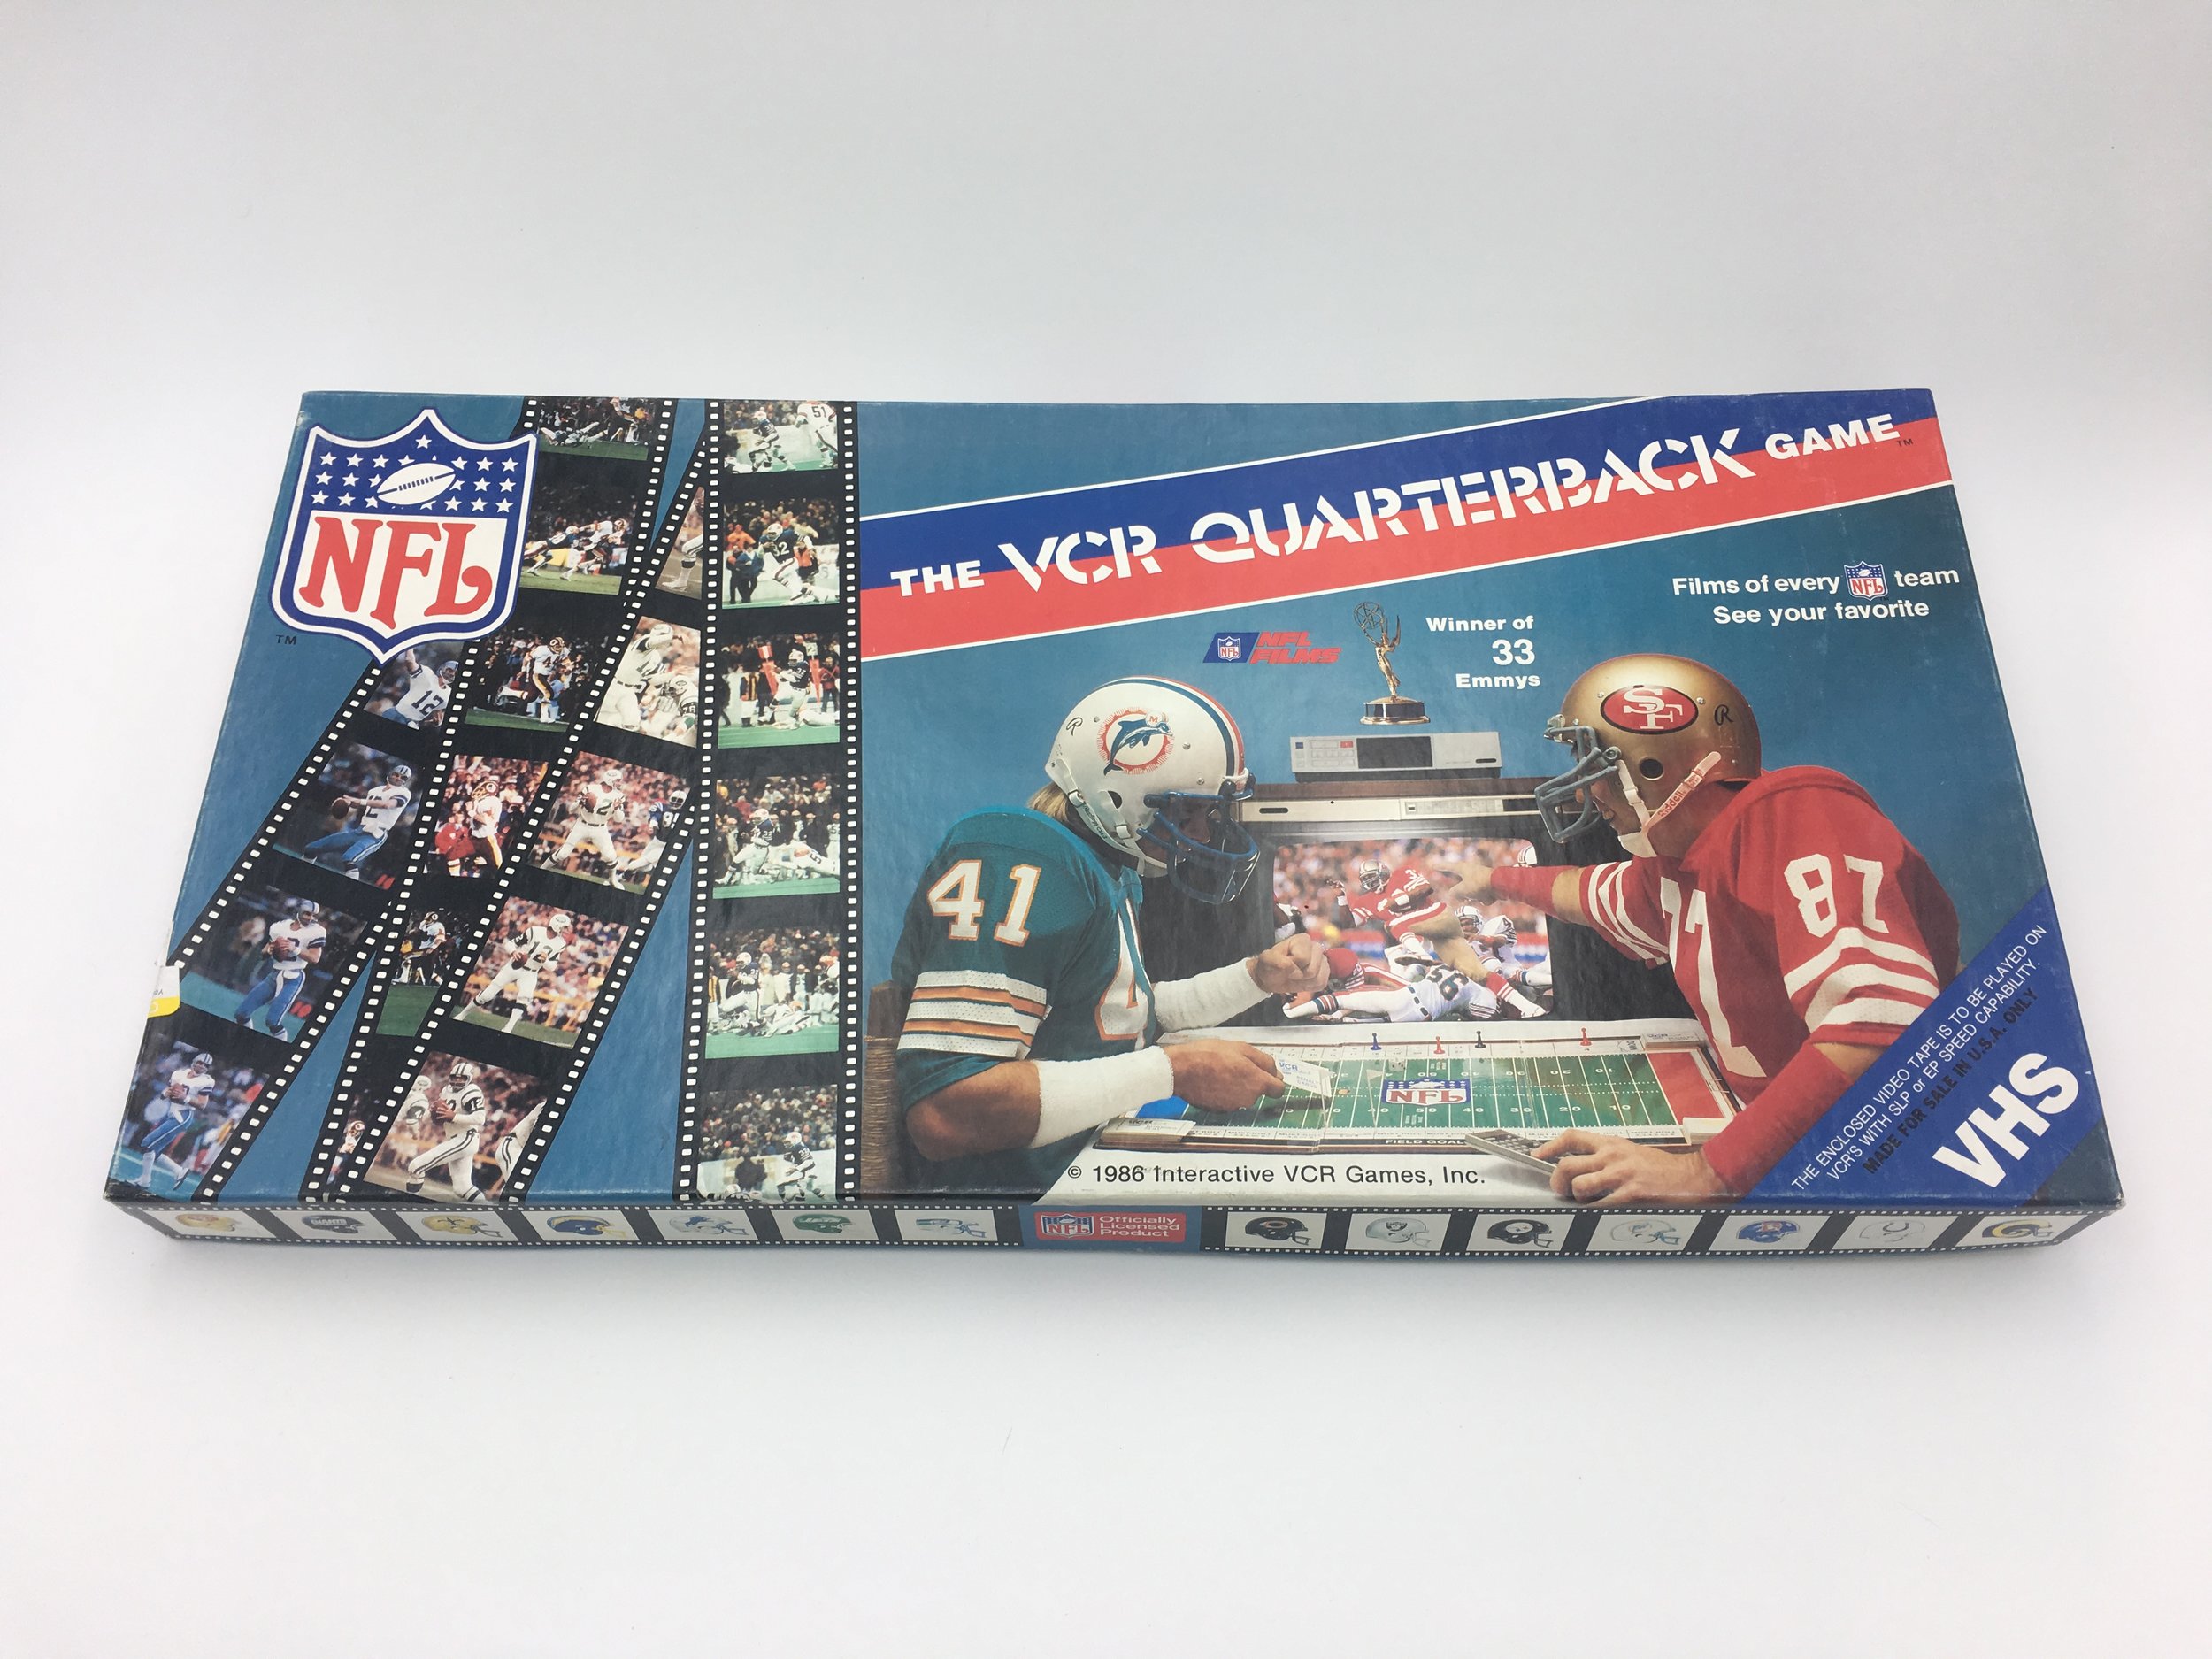 Details about   VCR QB quarterback game Interactive VHS 1986 for parts or board cards-You Choose 